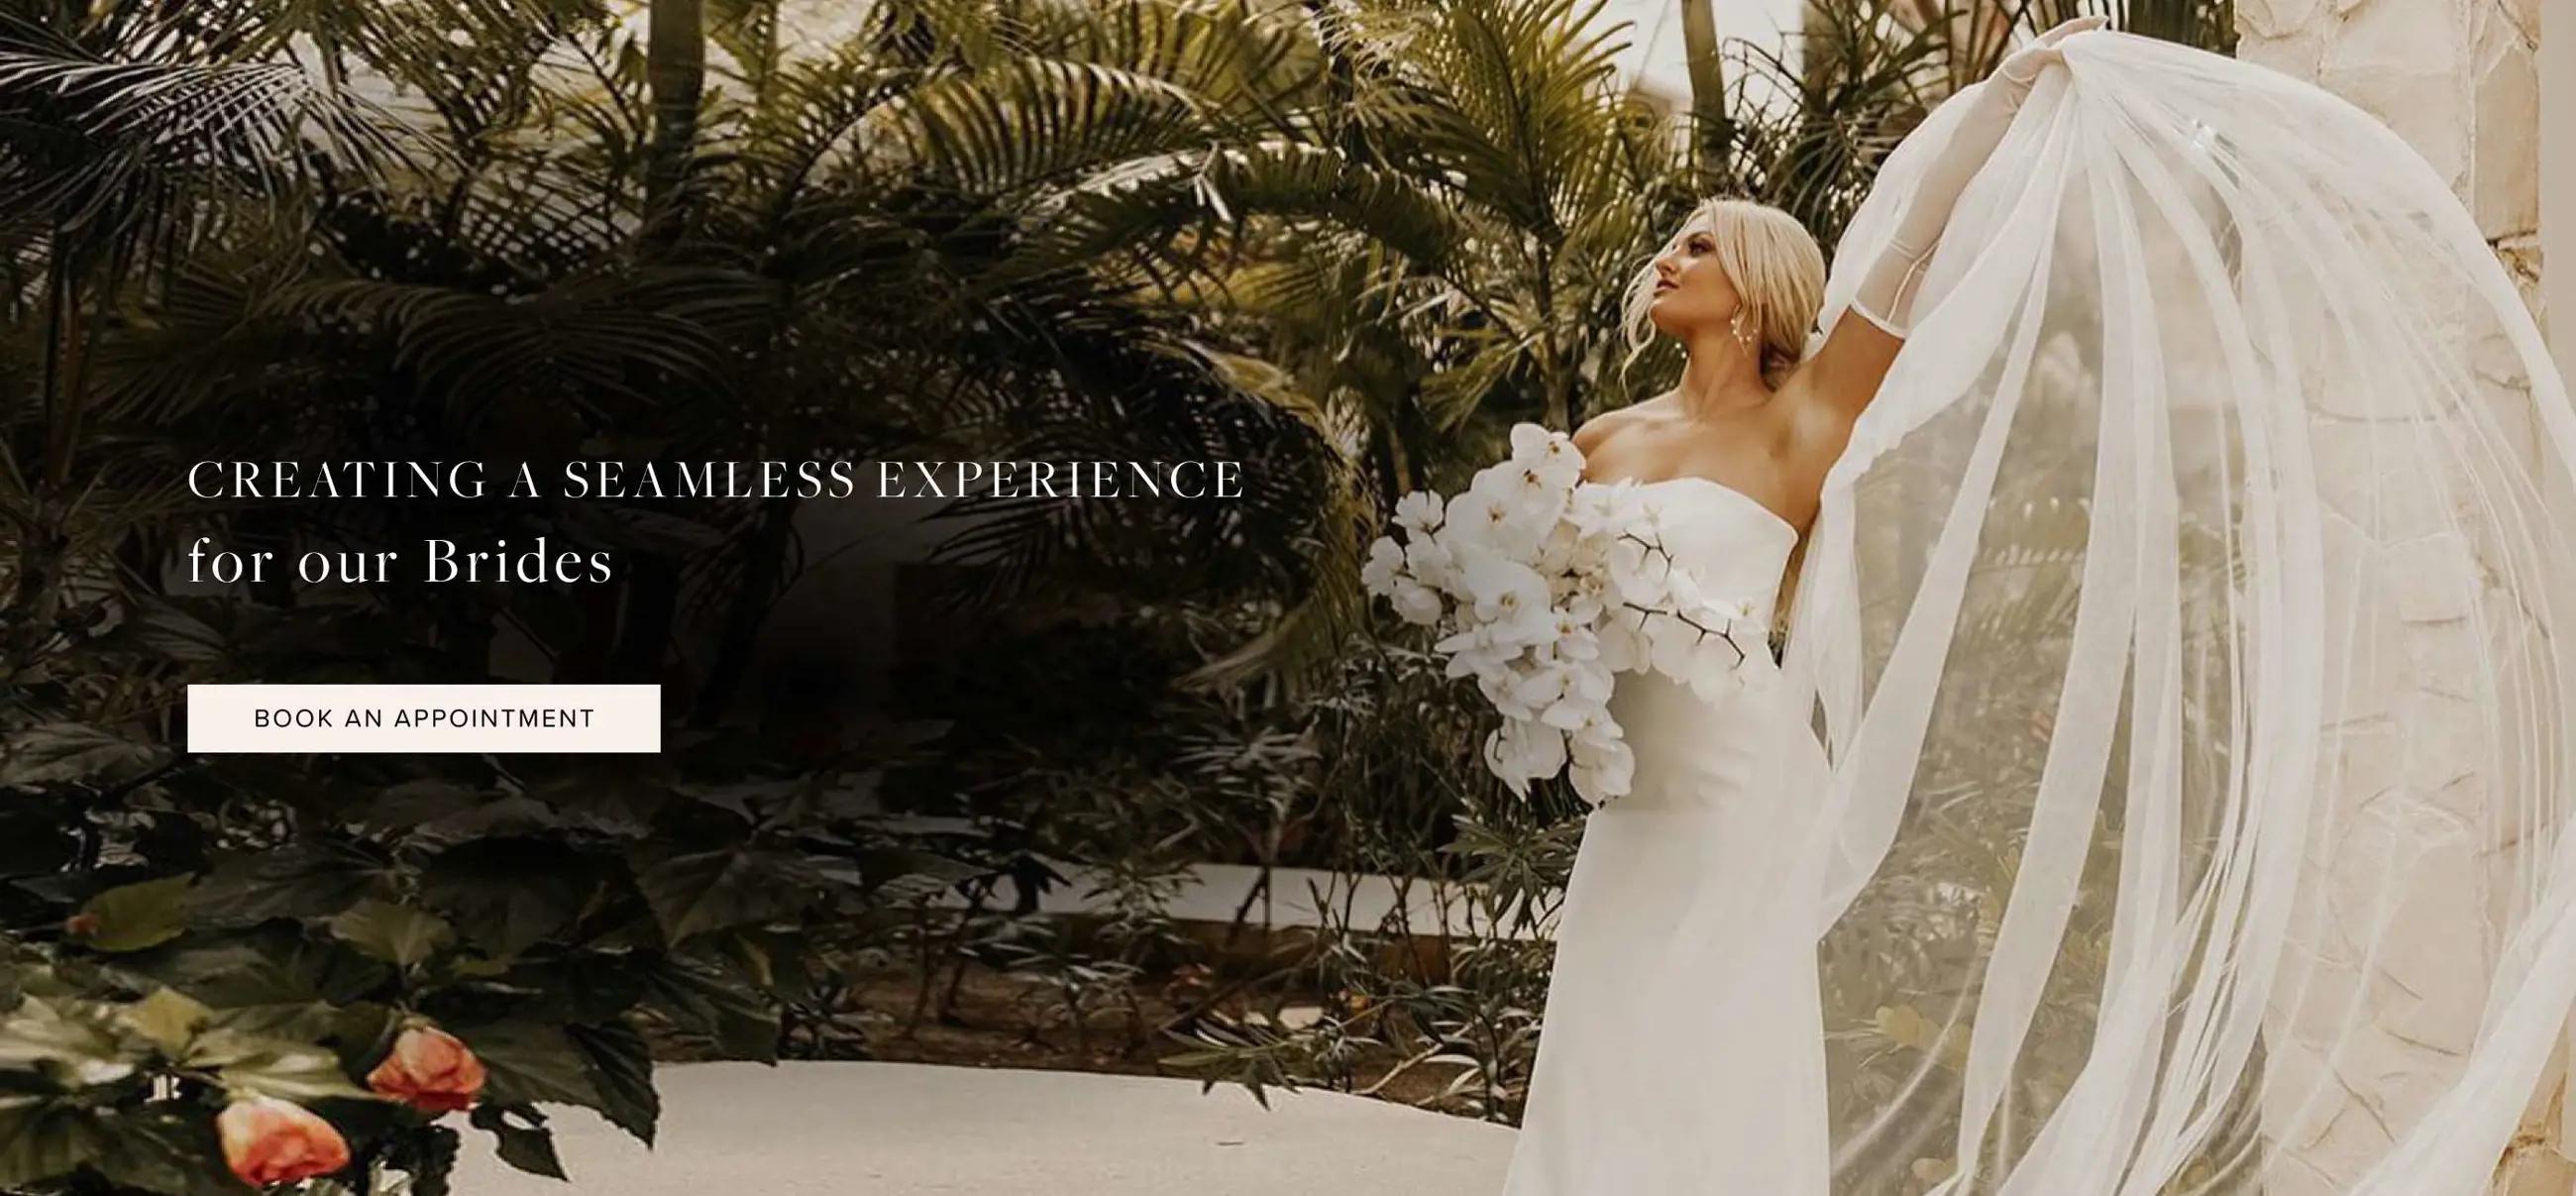 Find your dream wedding dress at Bliss Bridal